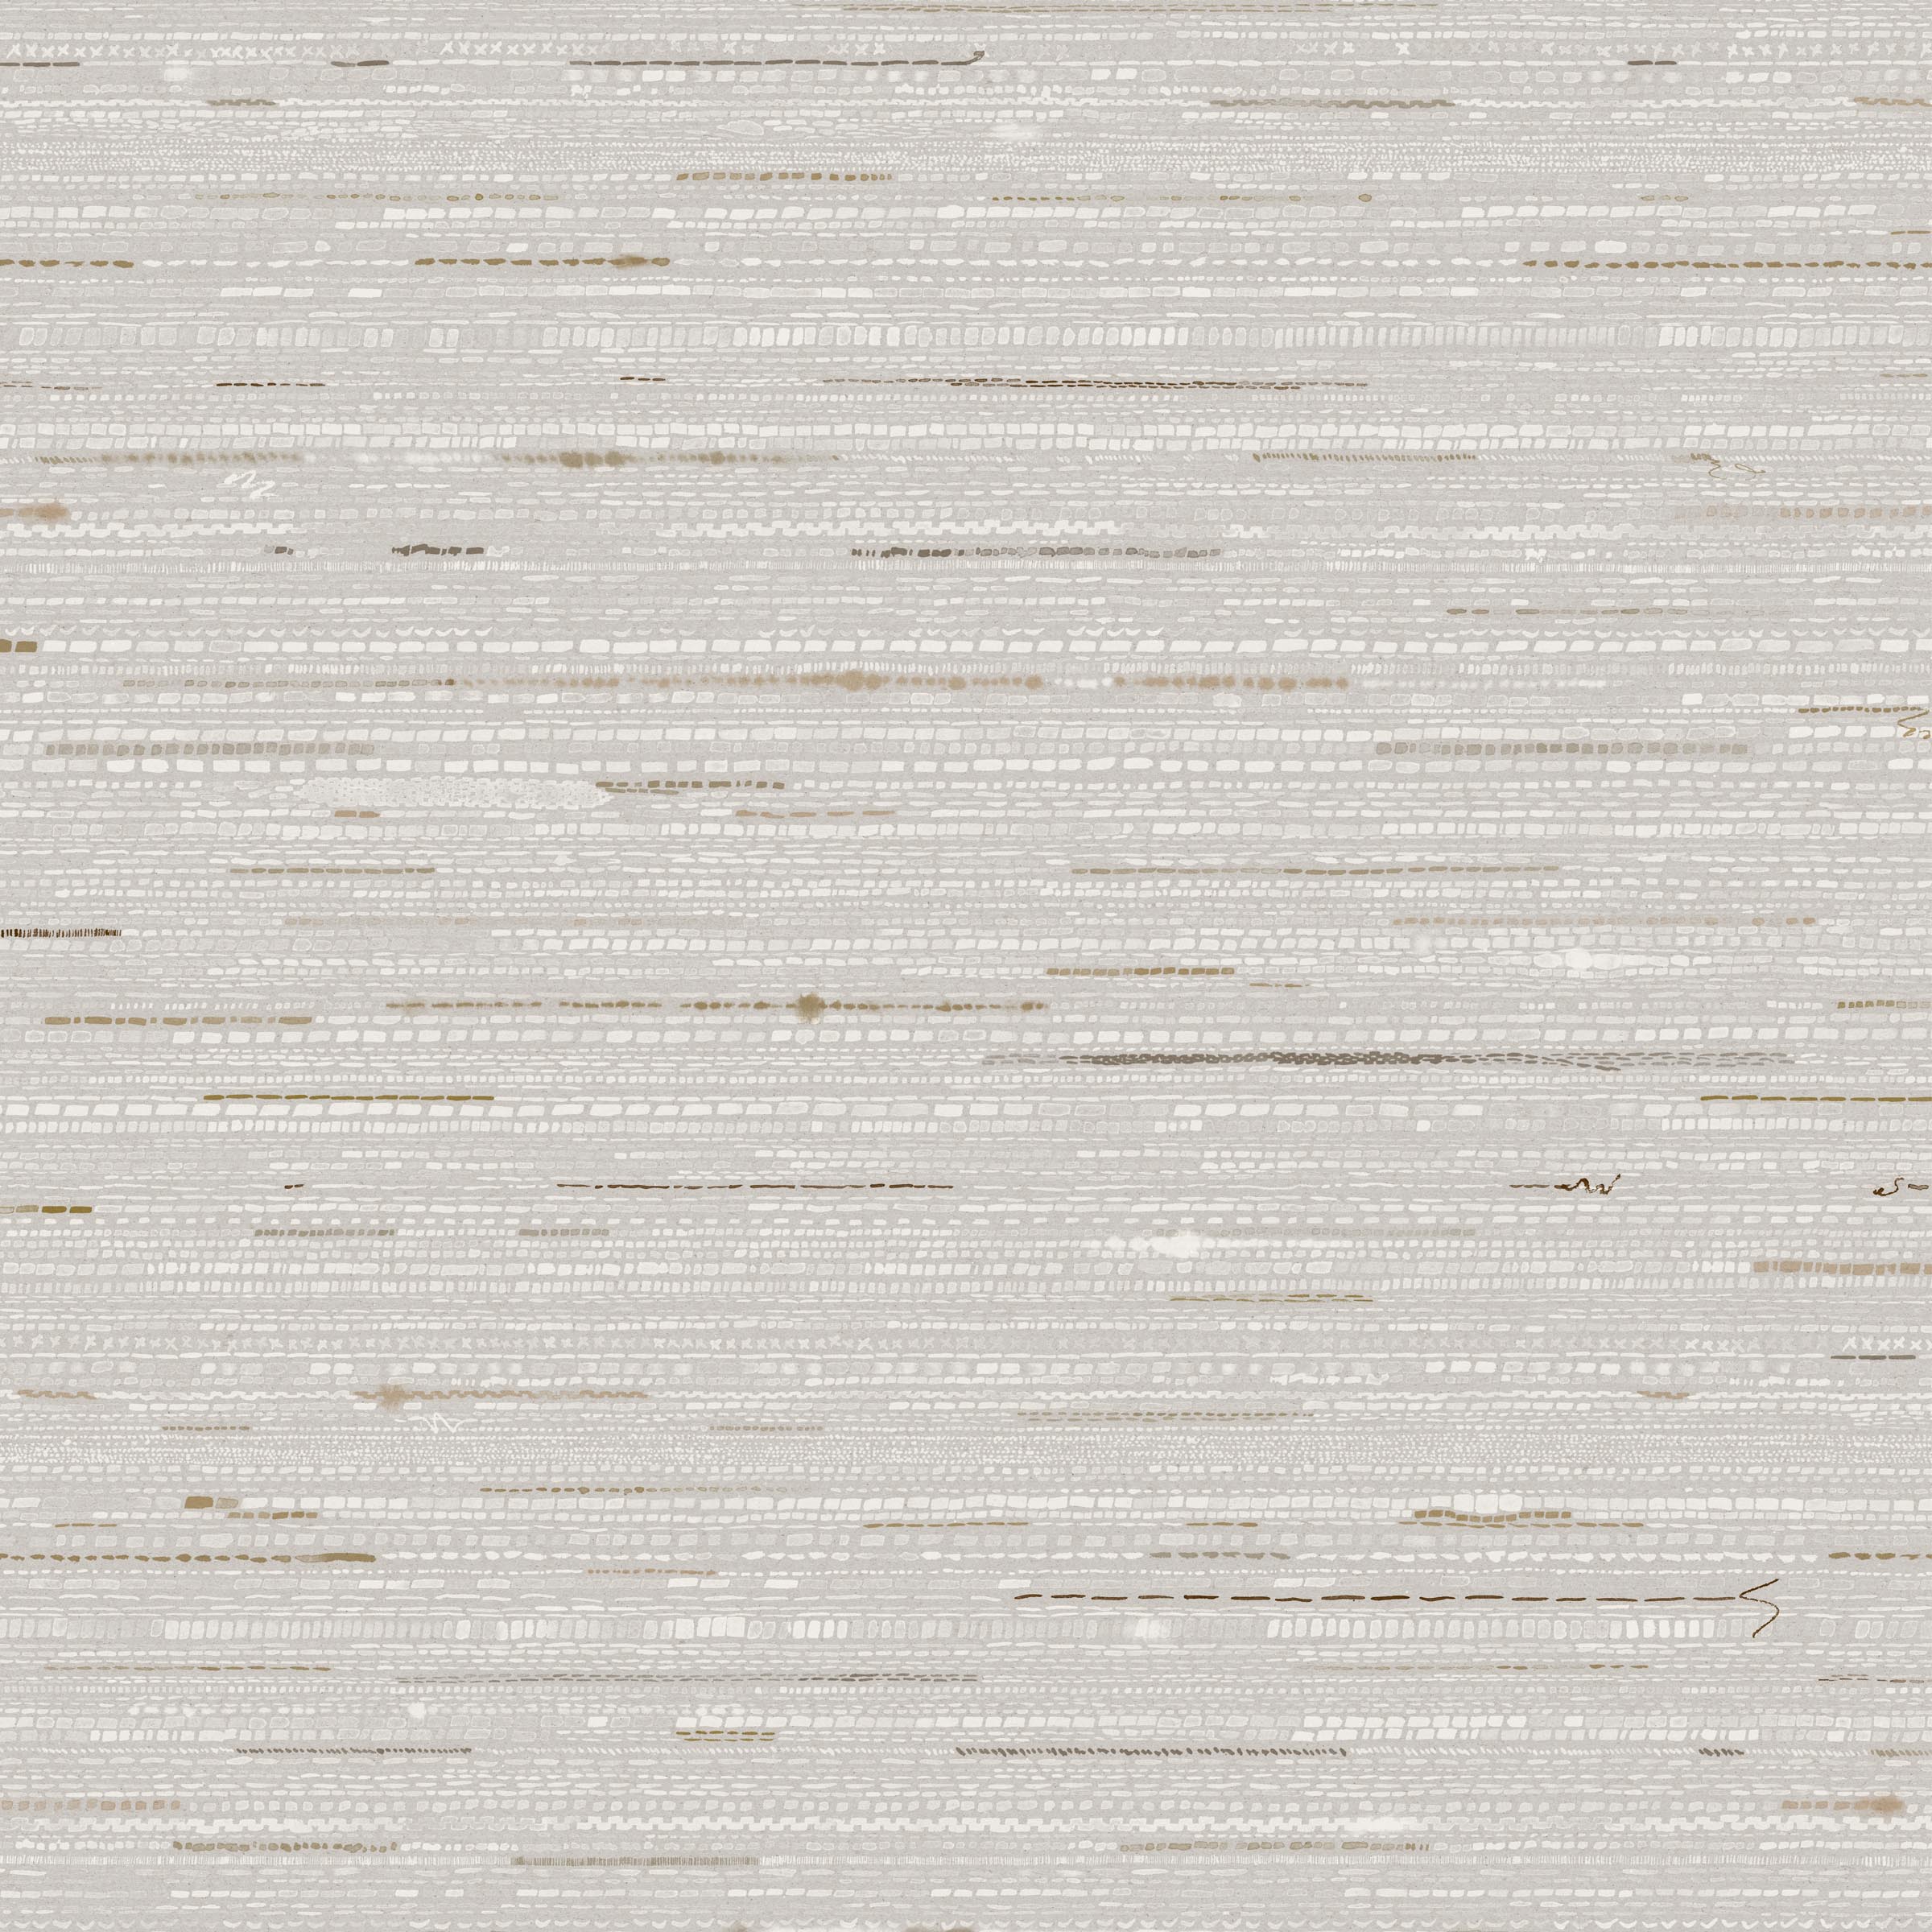 Detail of wallpaper in a textural striped pattern in shades of gray, white and tan.